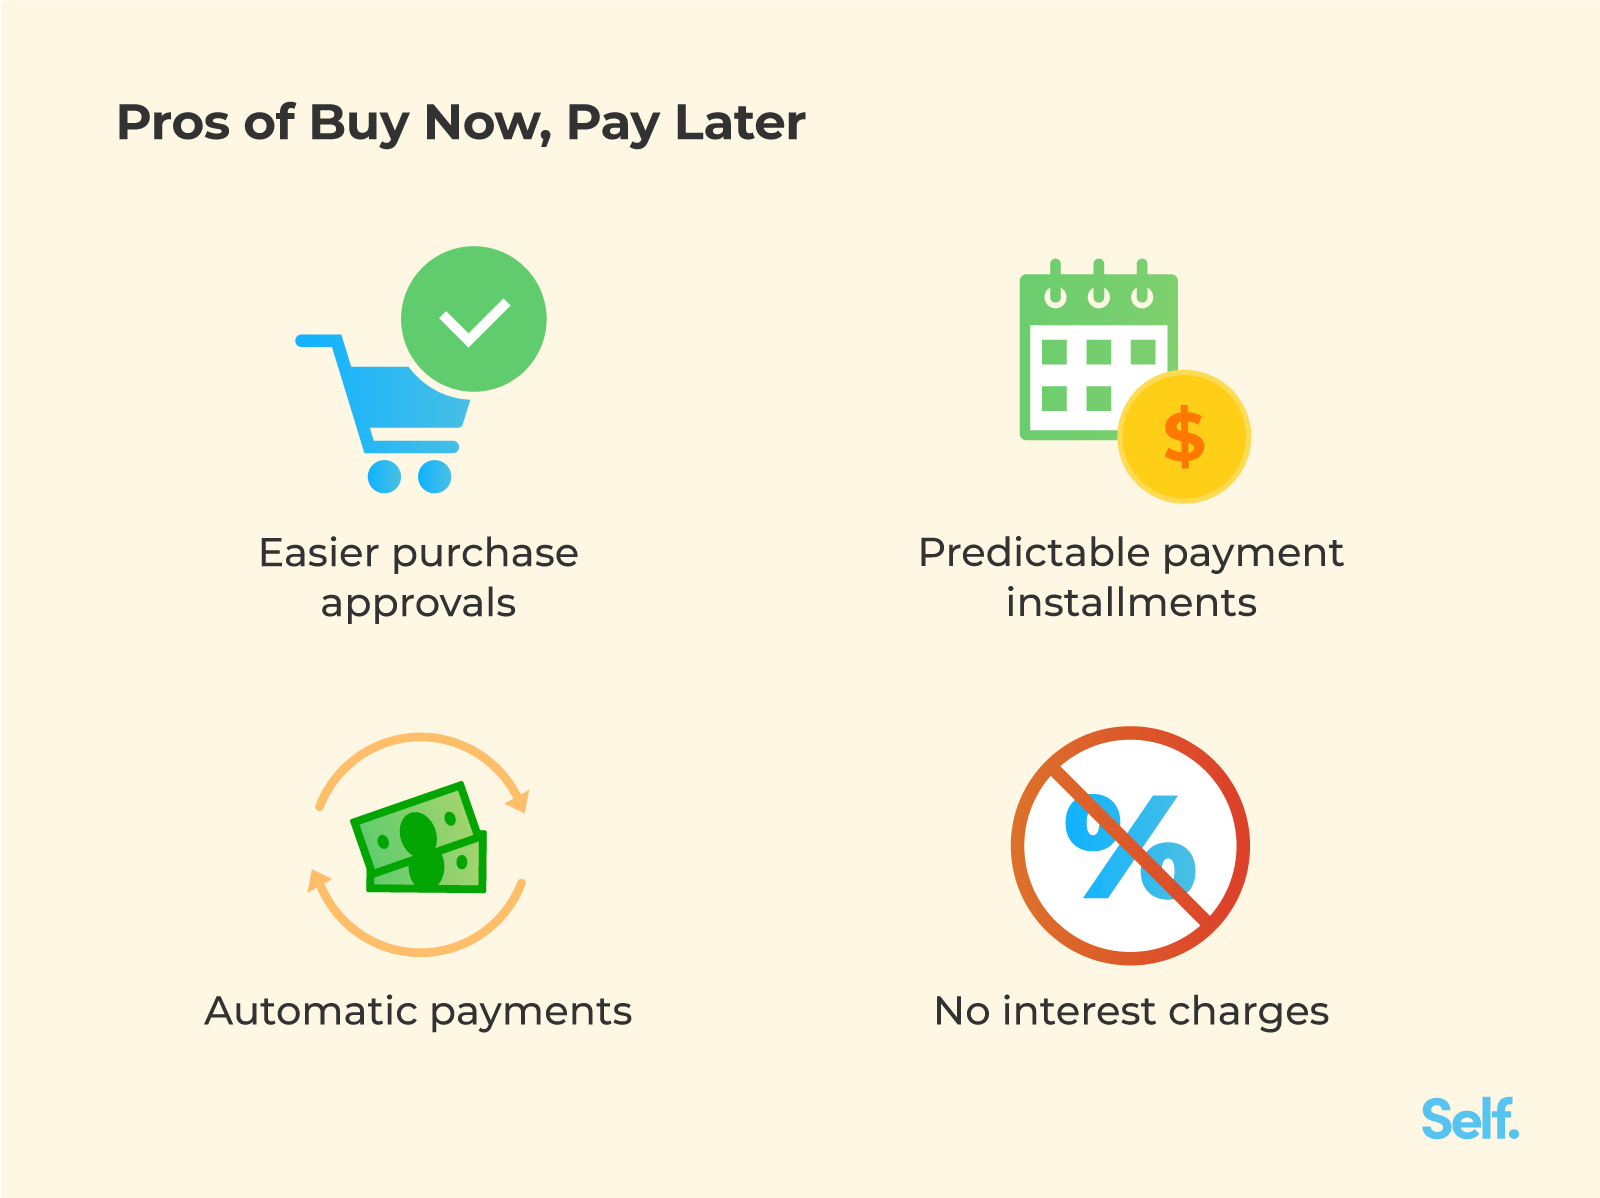 Should you buy now and pay later?